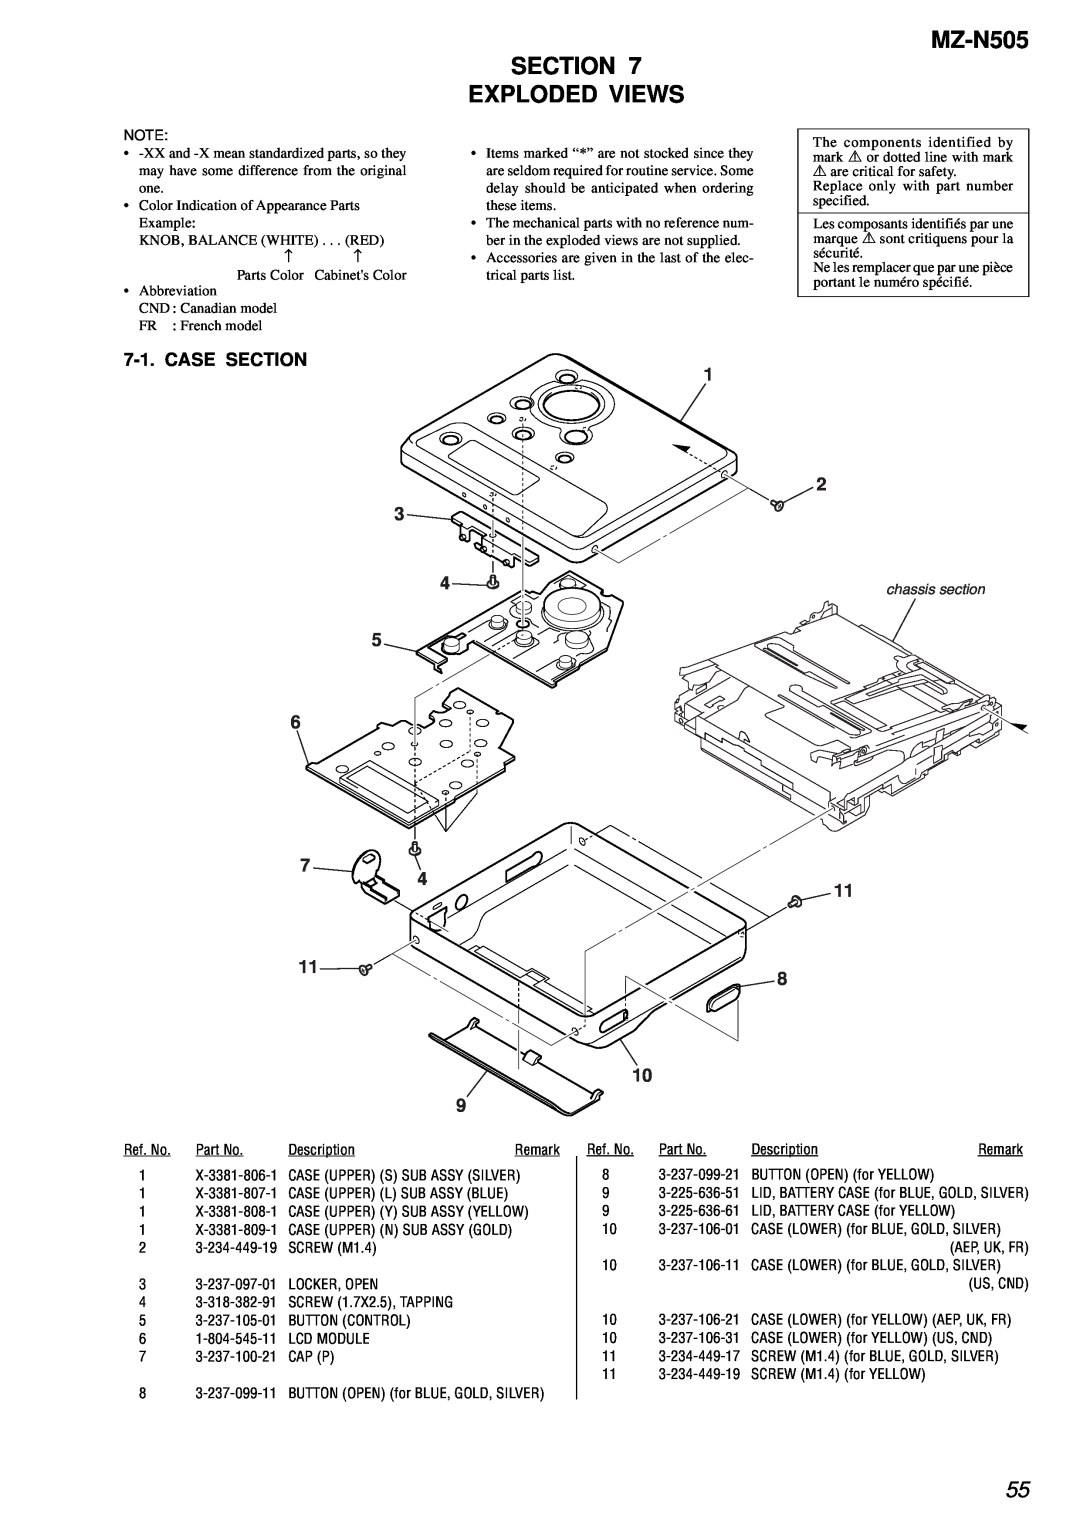 Sony MZ-N505 service manual Section Exploded Views, Case Section, 7 4 